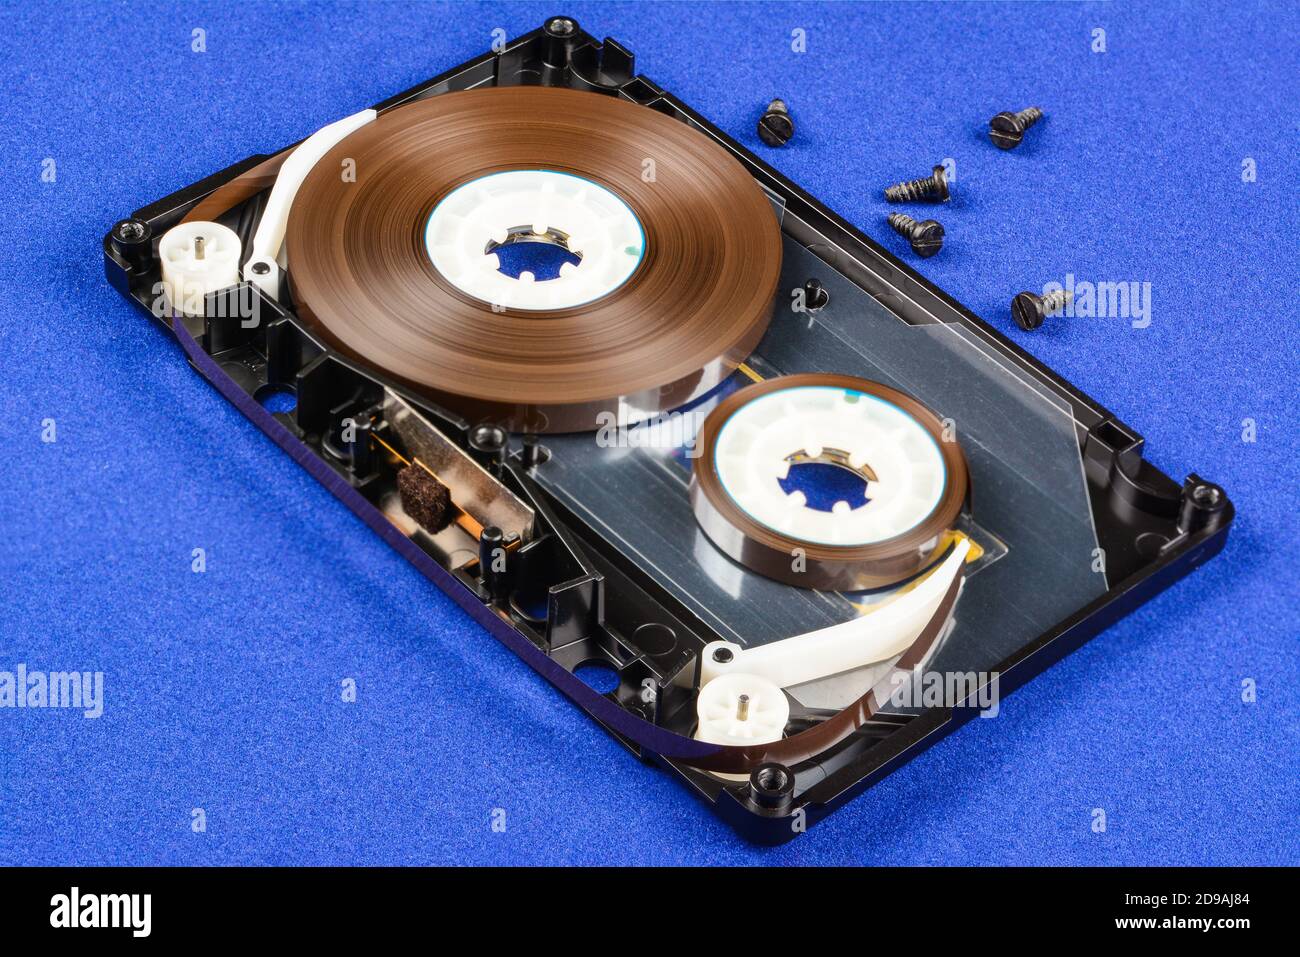 Disassembled audio compact cassette with SM mechanism. Audio cassette with tape guide as security mechanism and screws. on blue background. Stock Photo